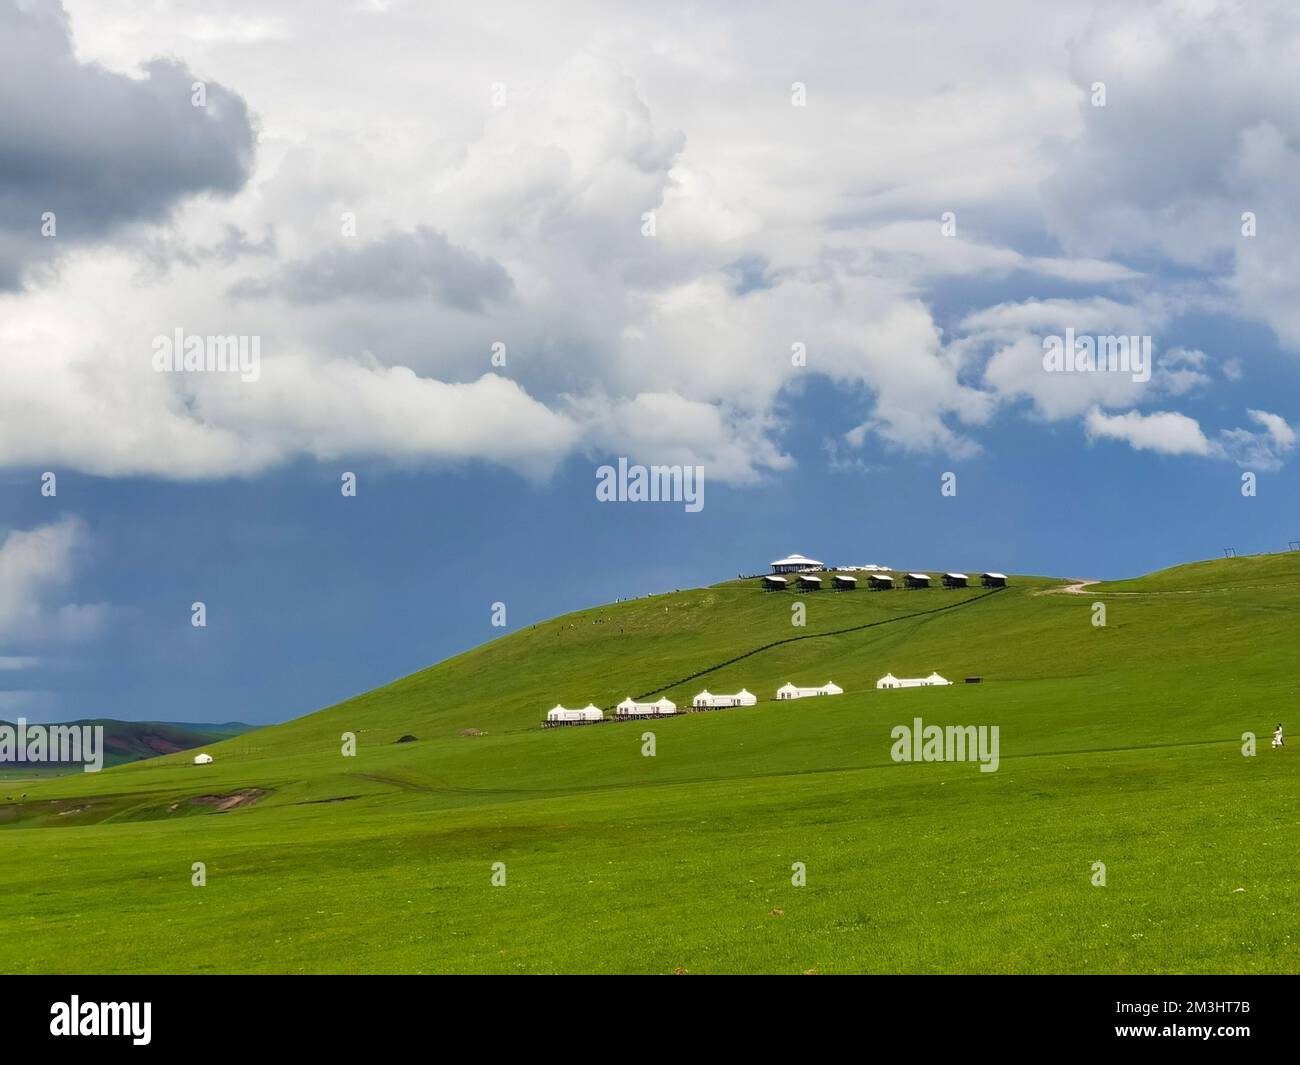 The Yurts (Gears) in a wide mountain grassland under blue cloudy sky in inner Mongolia, China Stock Photo